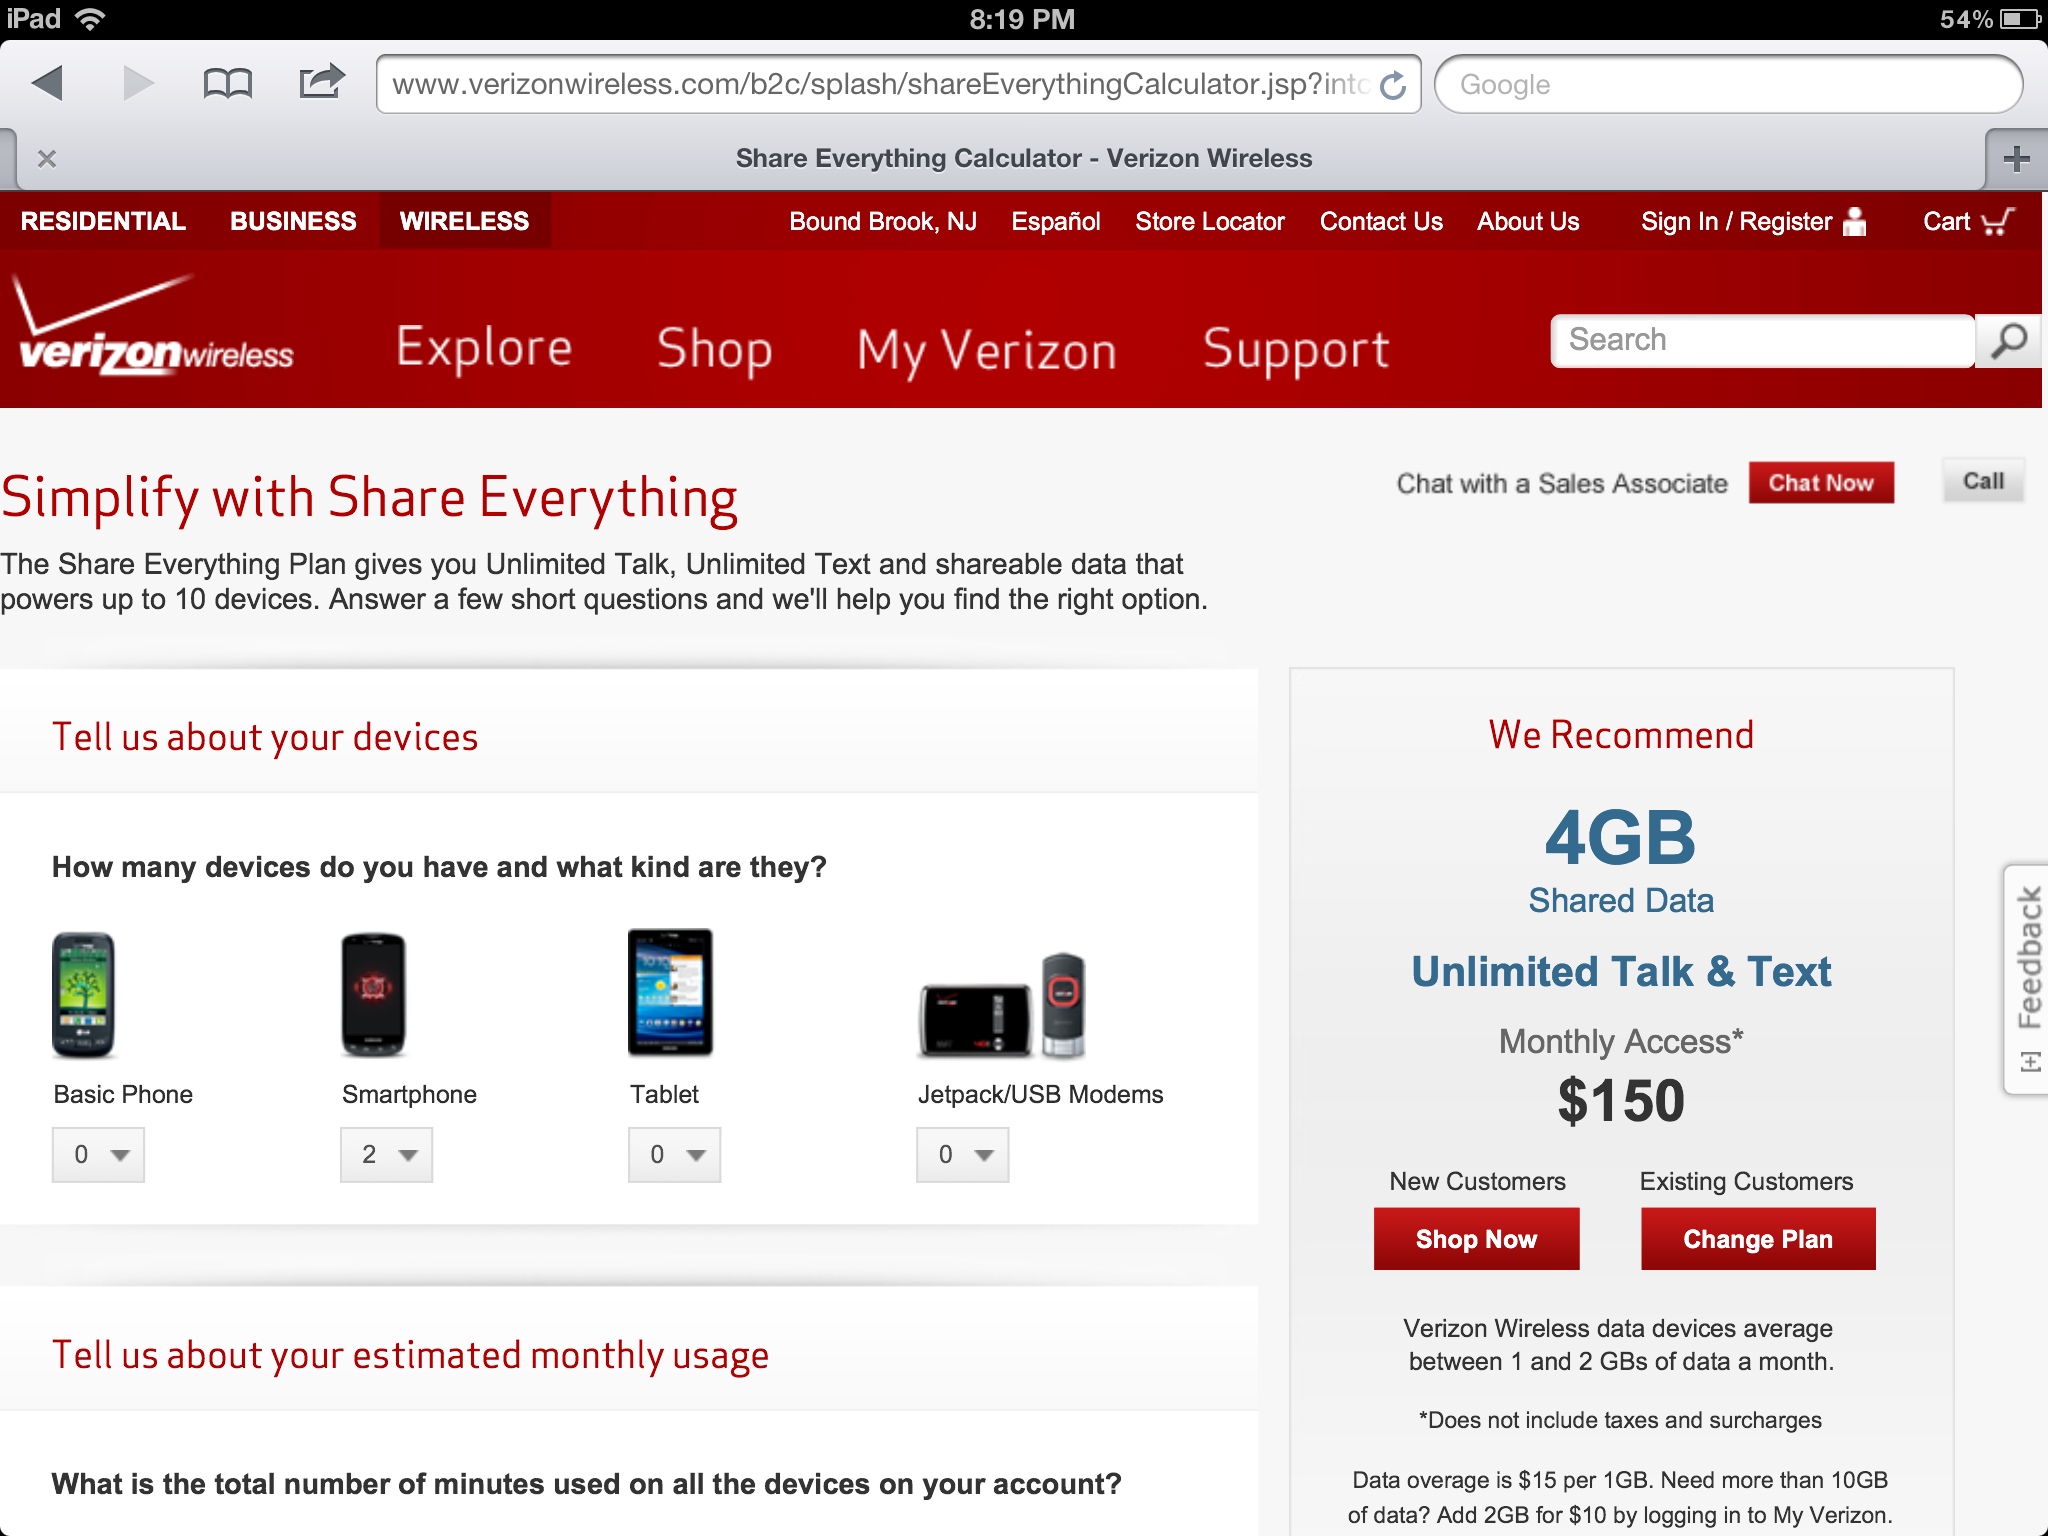 Do Verizon's "Share Everything" Plans Actually Save You Money?